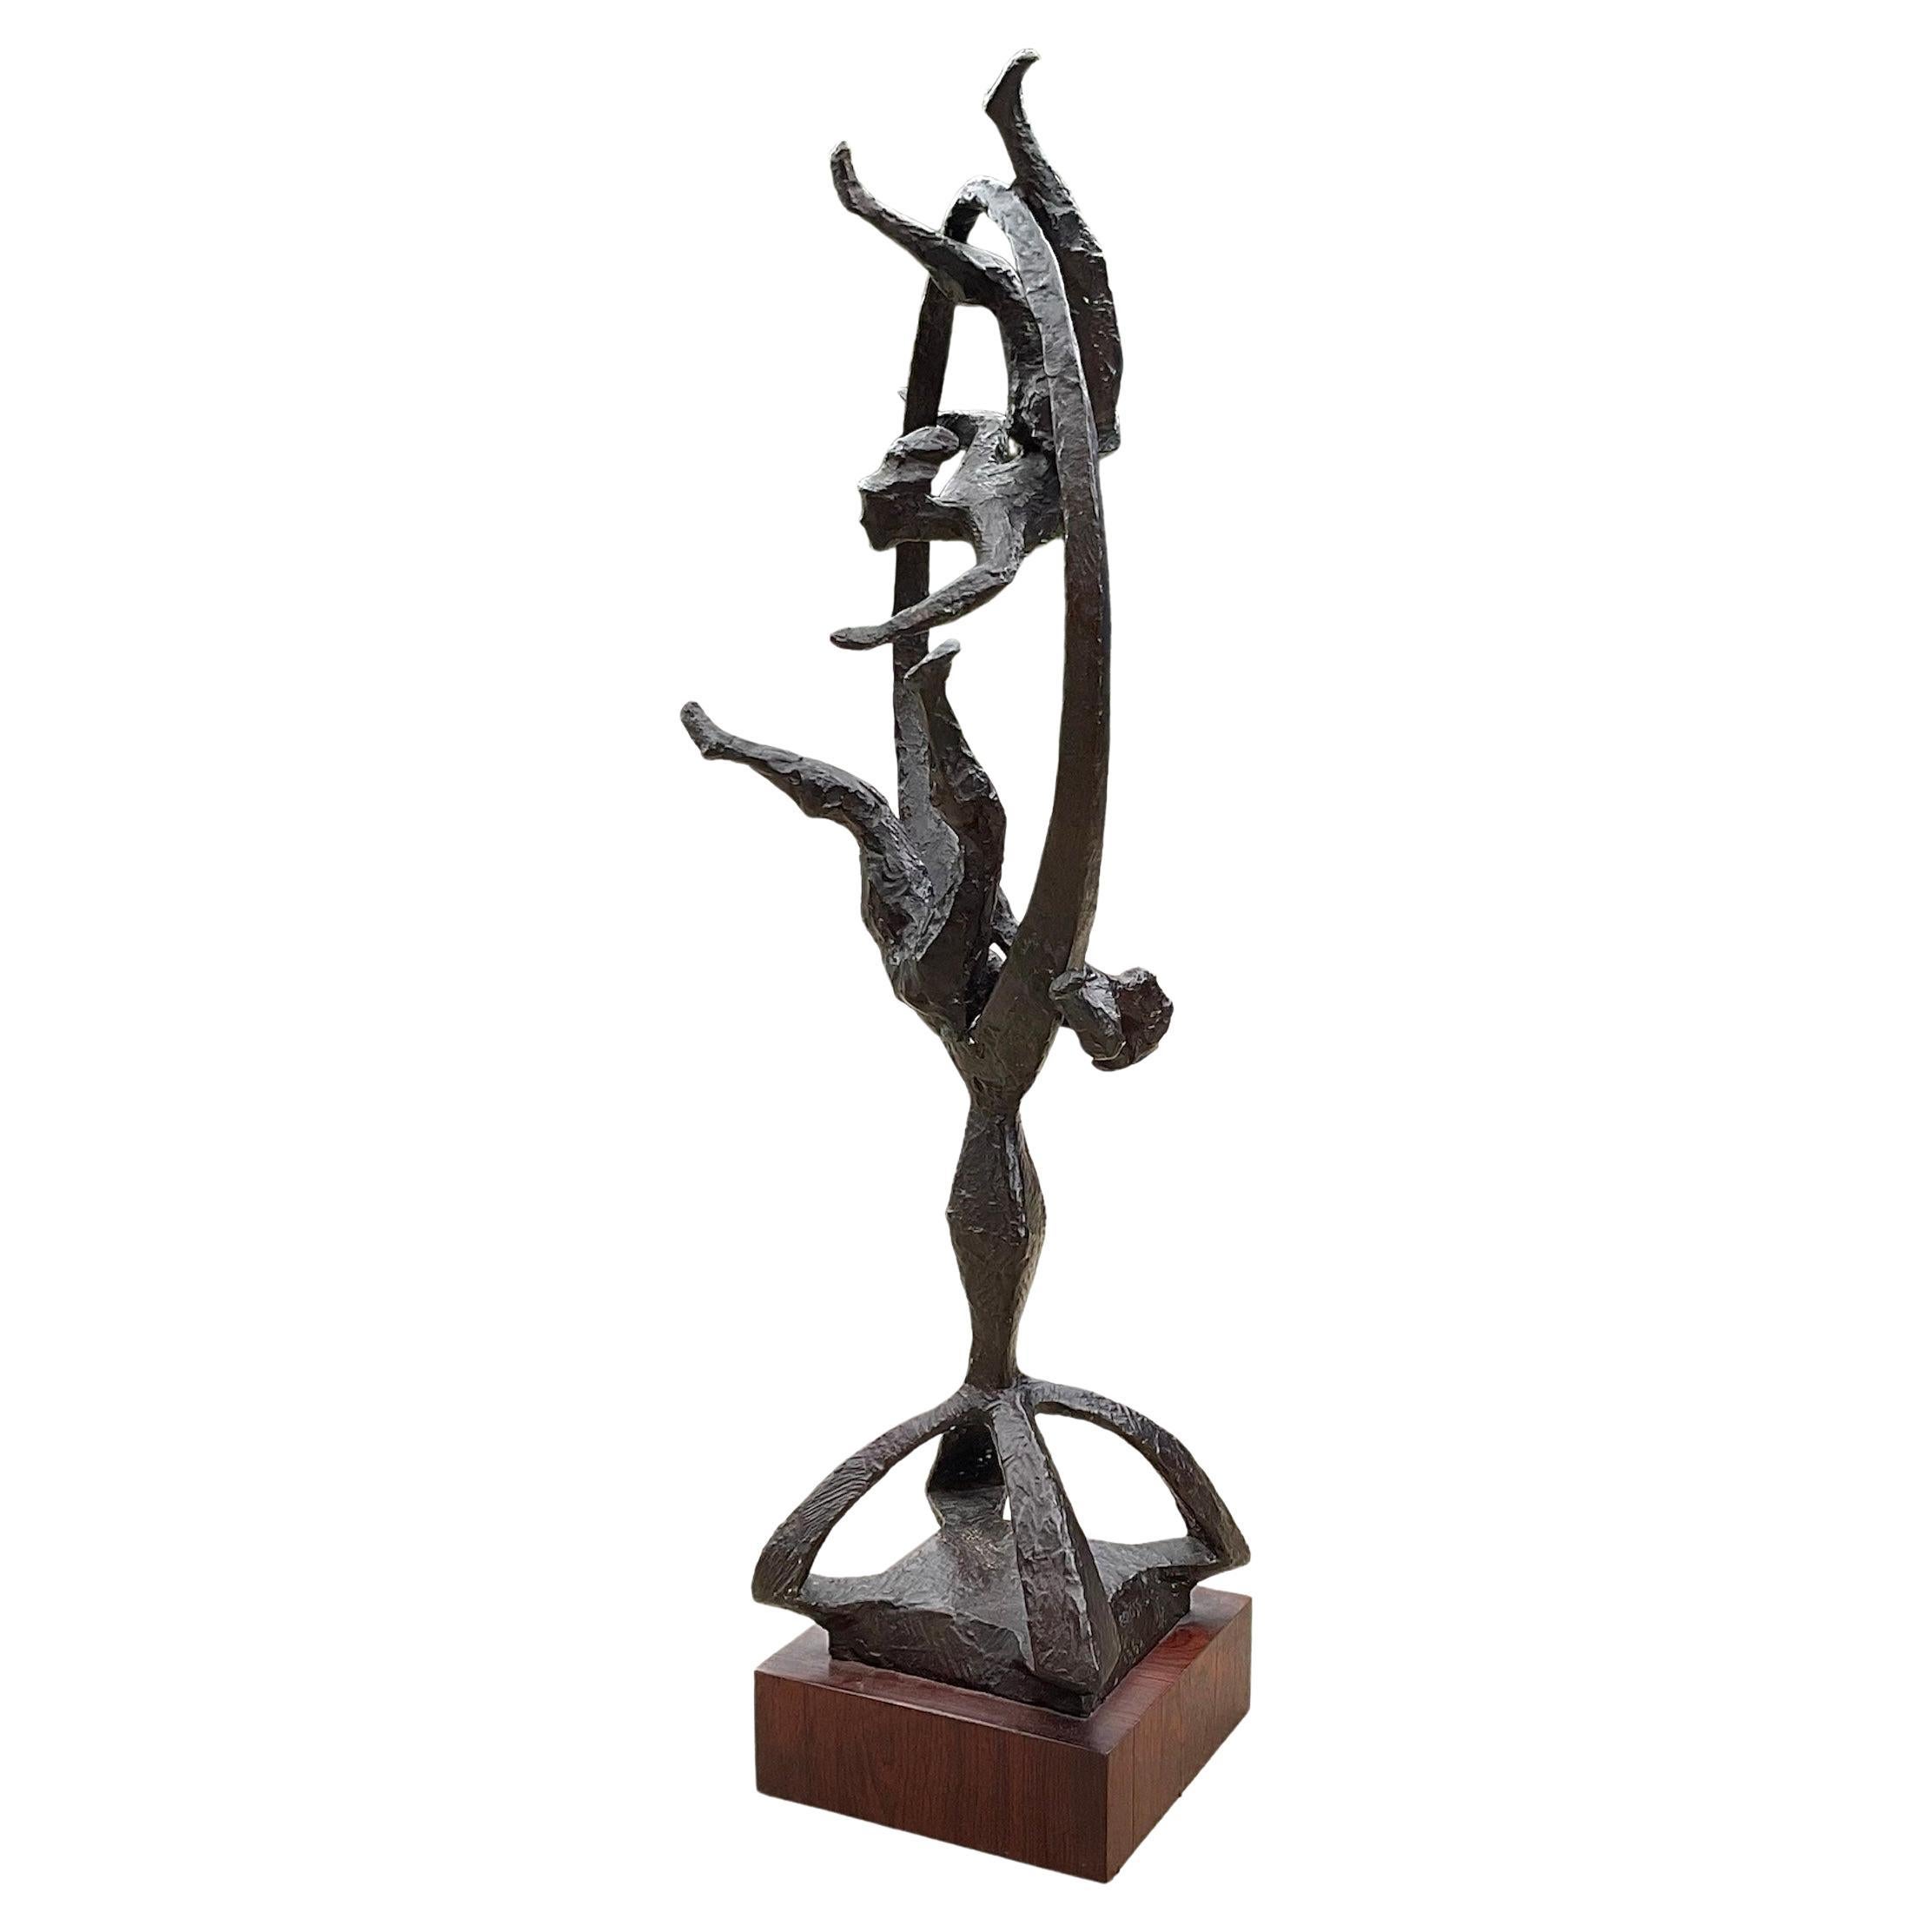 LARGE Chaim Gross Large Acrobat Bronze Sculpture Signed and Dated 1964 